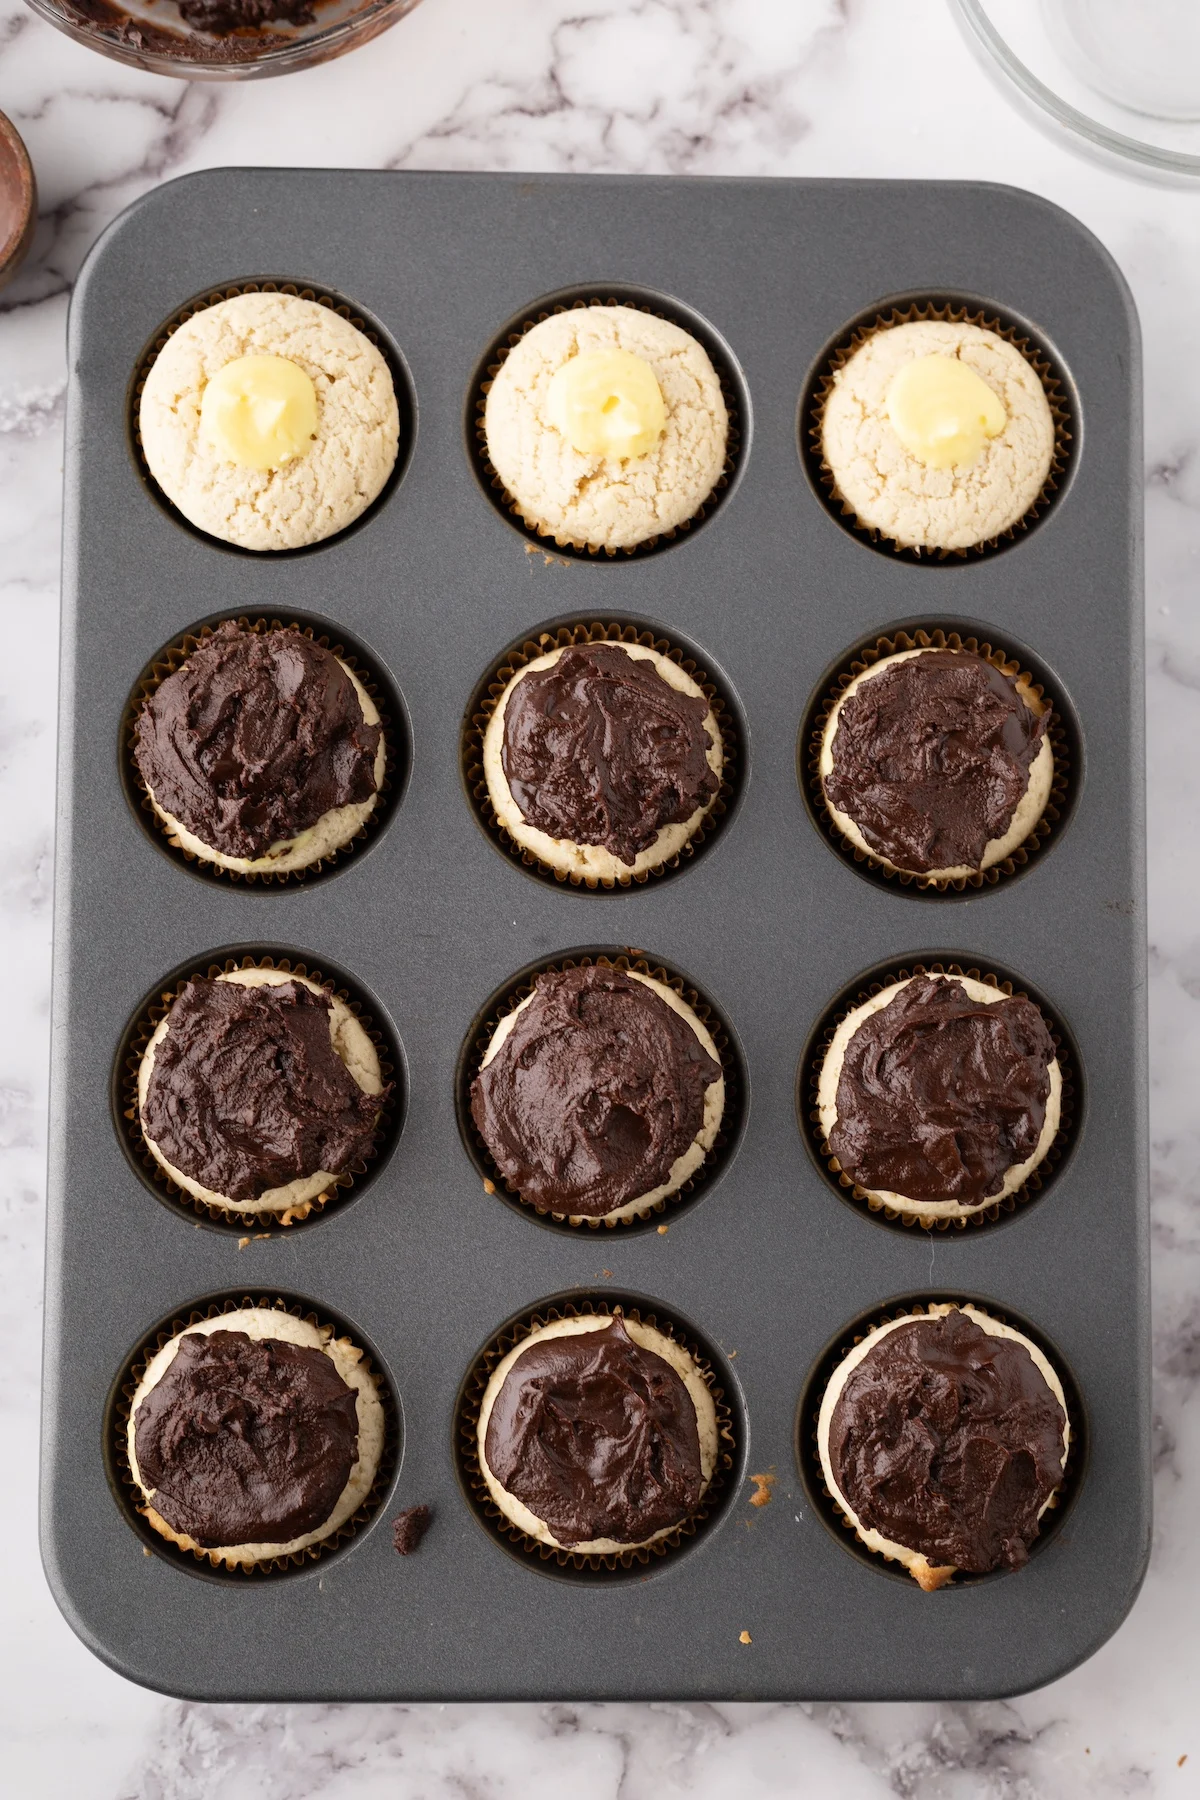 Cupcakes topped with chocolate ganache